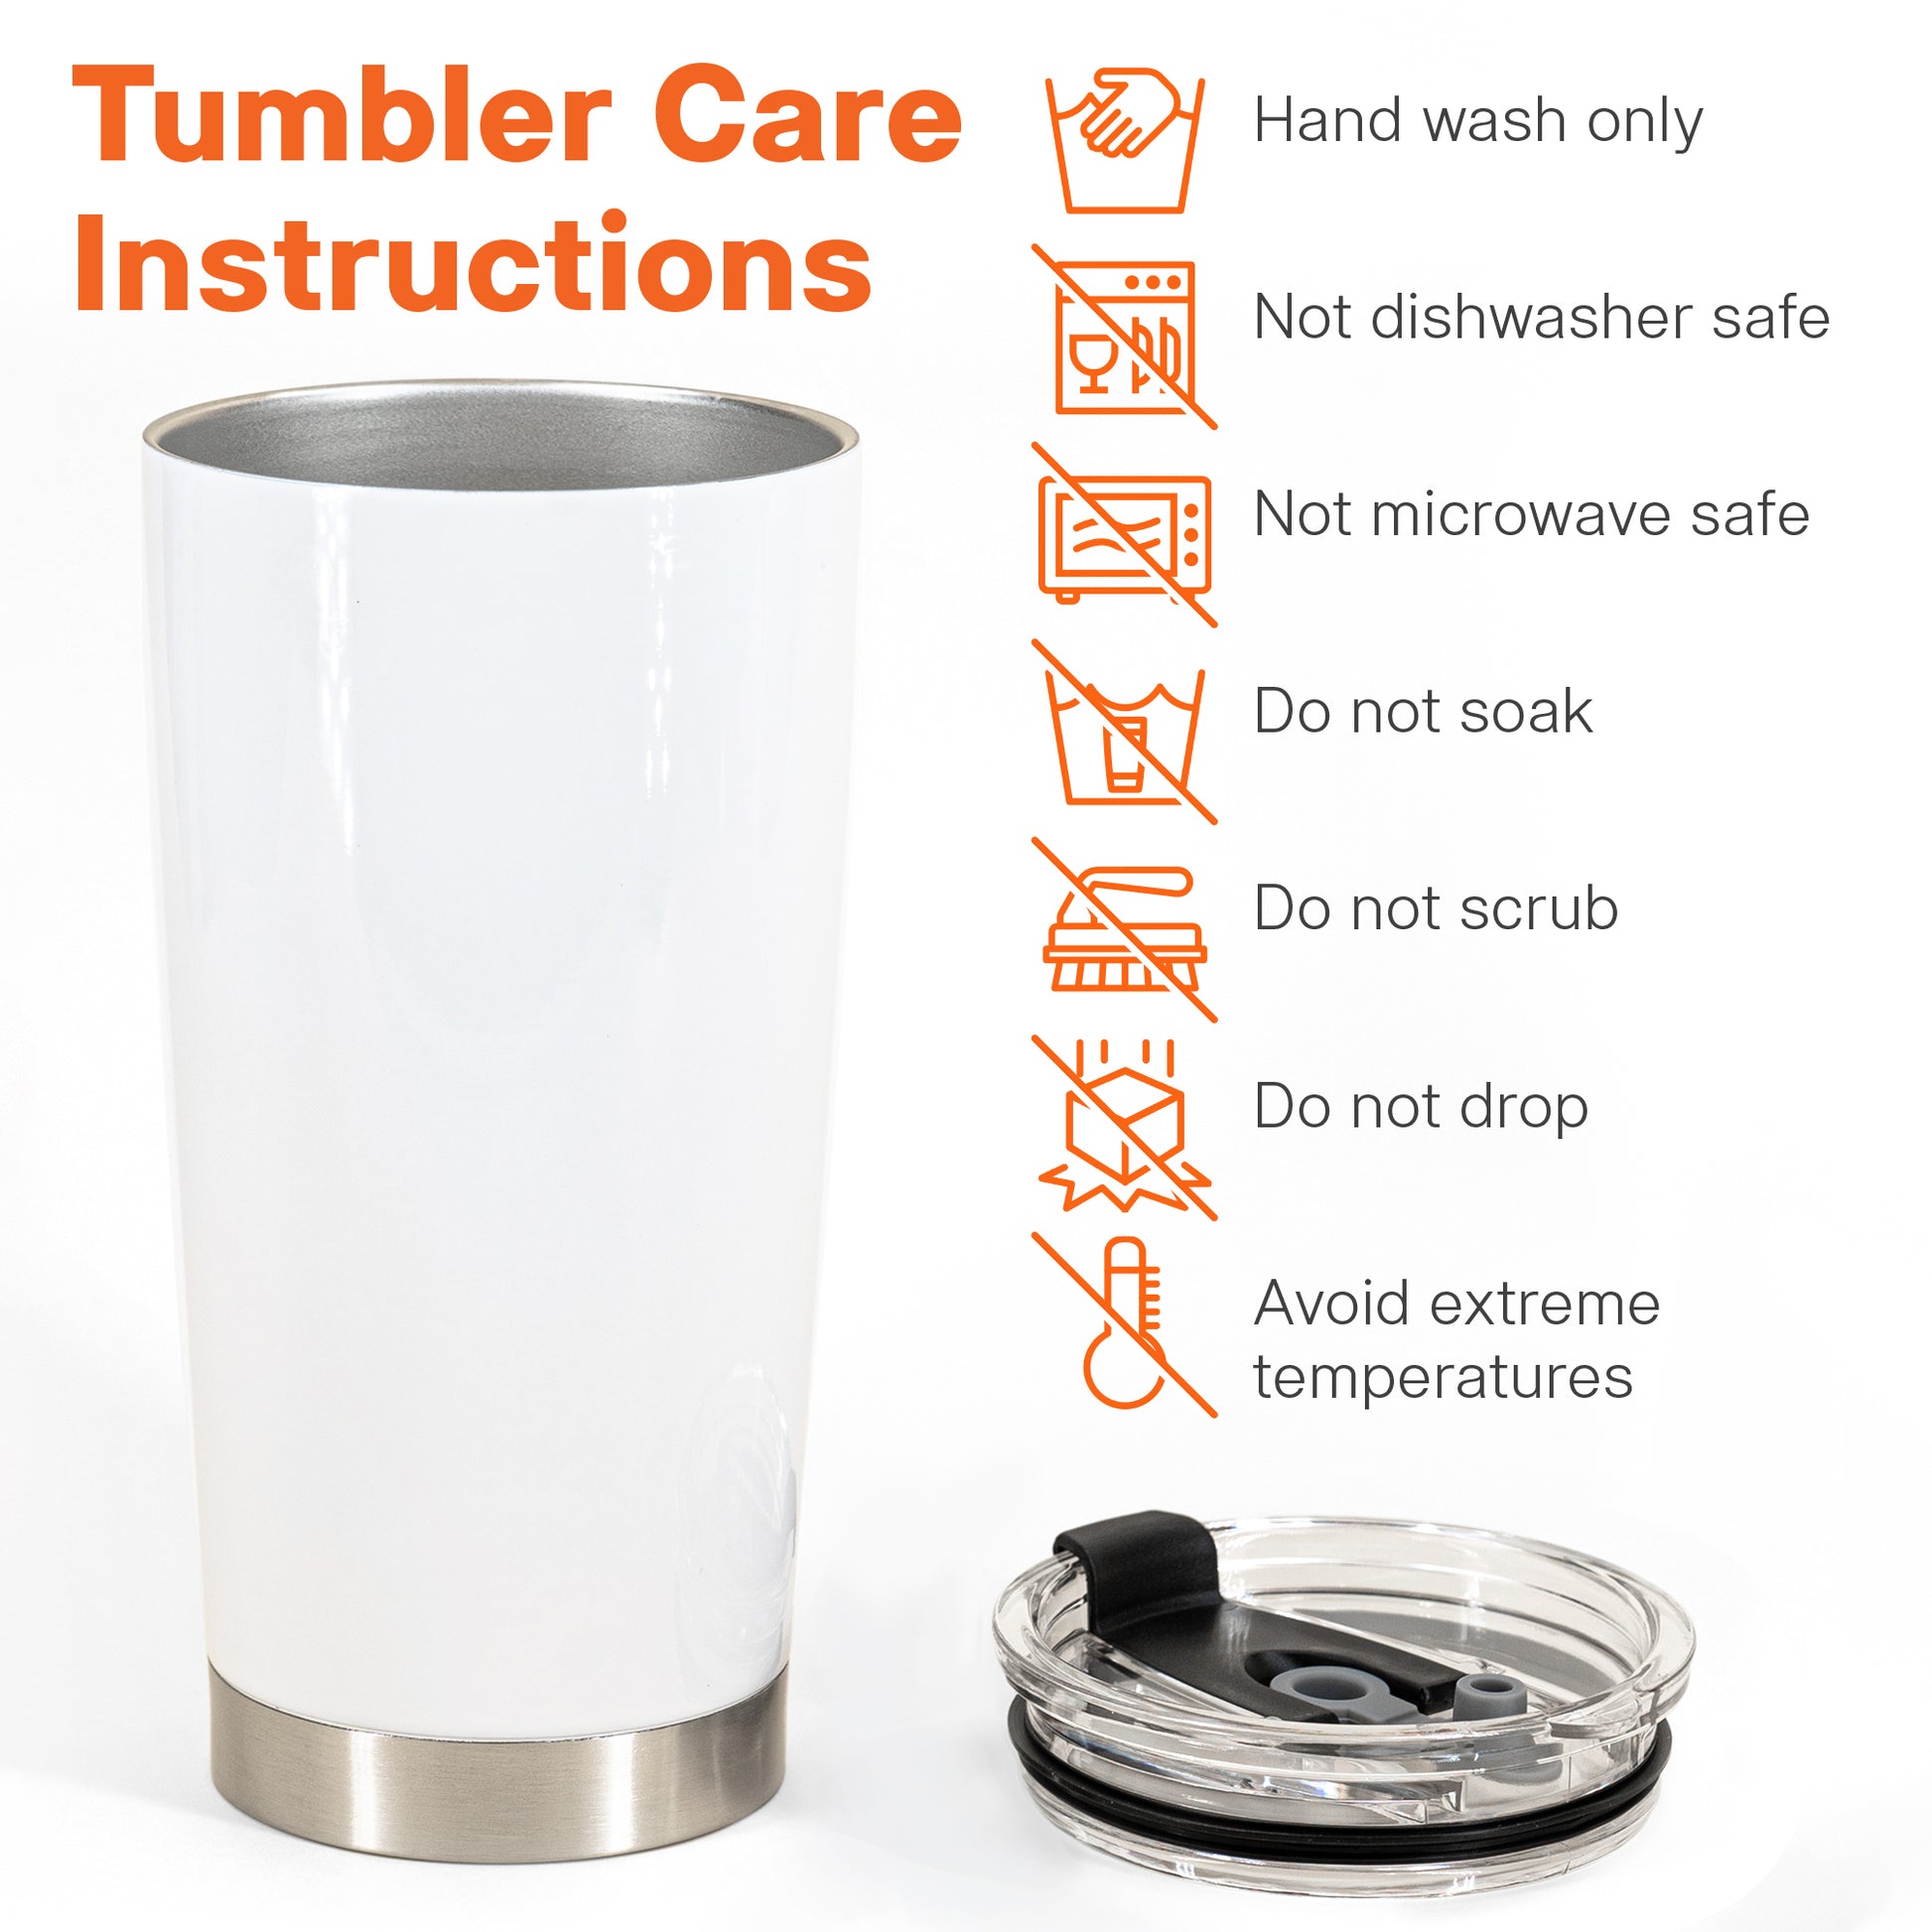 Disassemble the Kids' Tumbler with us! 🙌 Keeping this cup clean